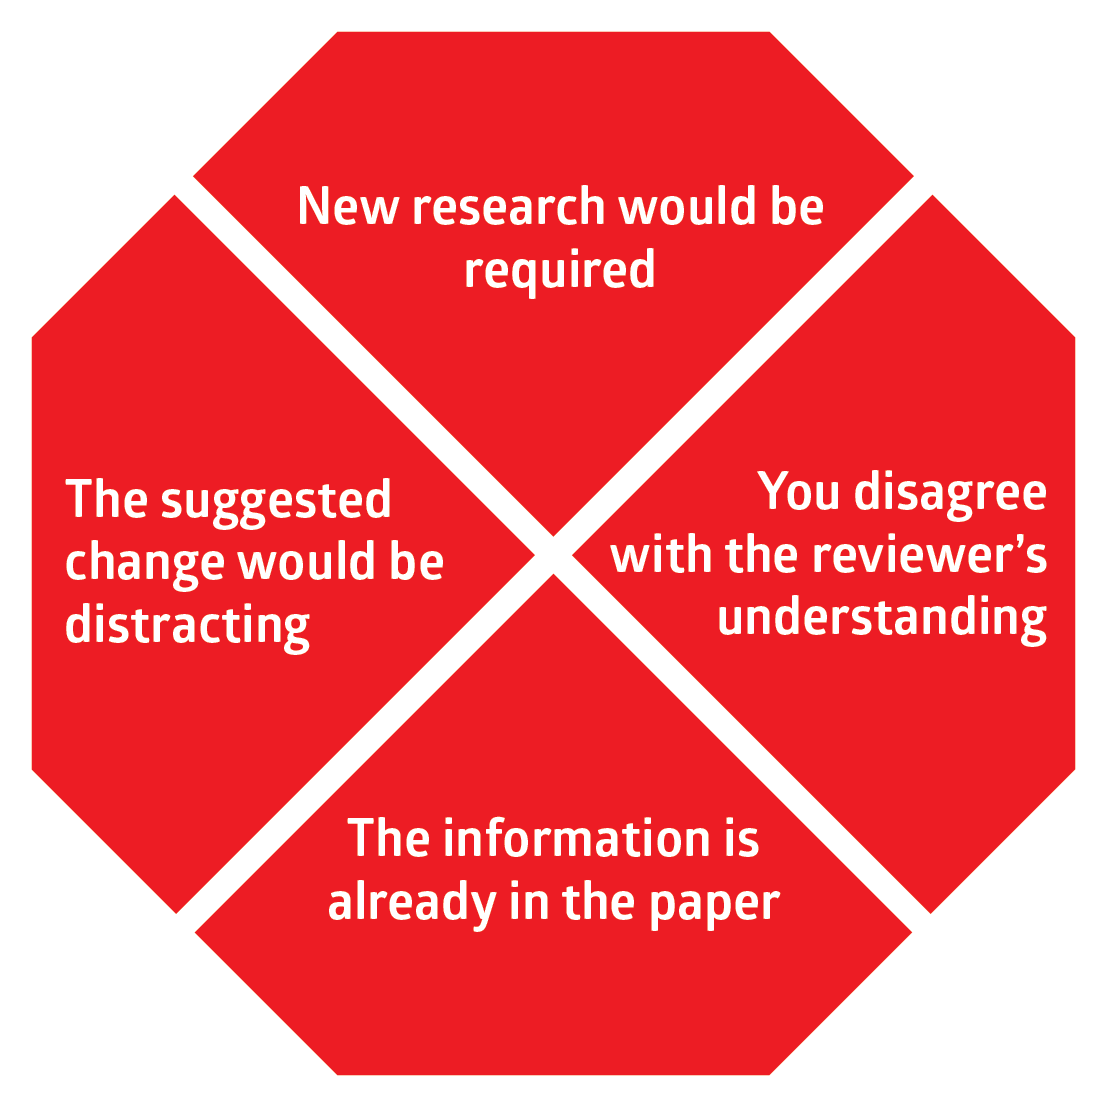 Declining reviewer suggestions during peer review